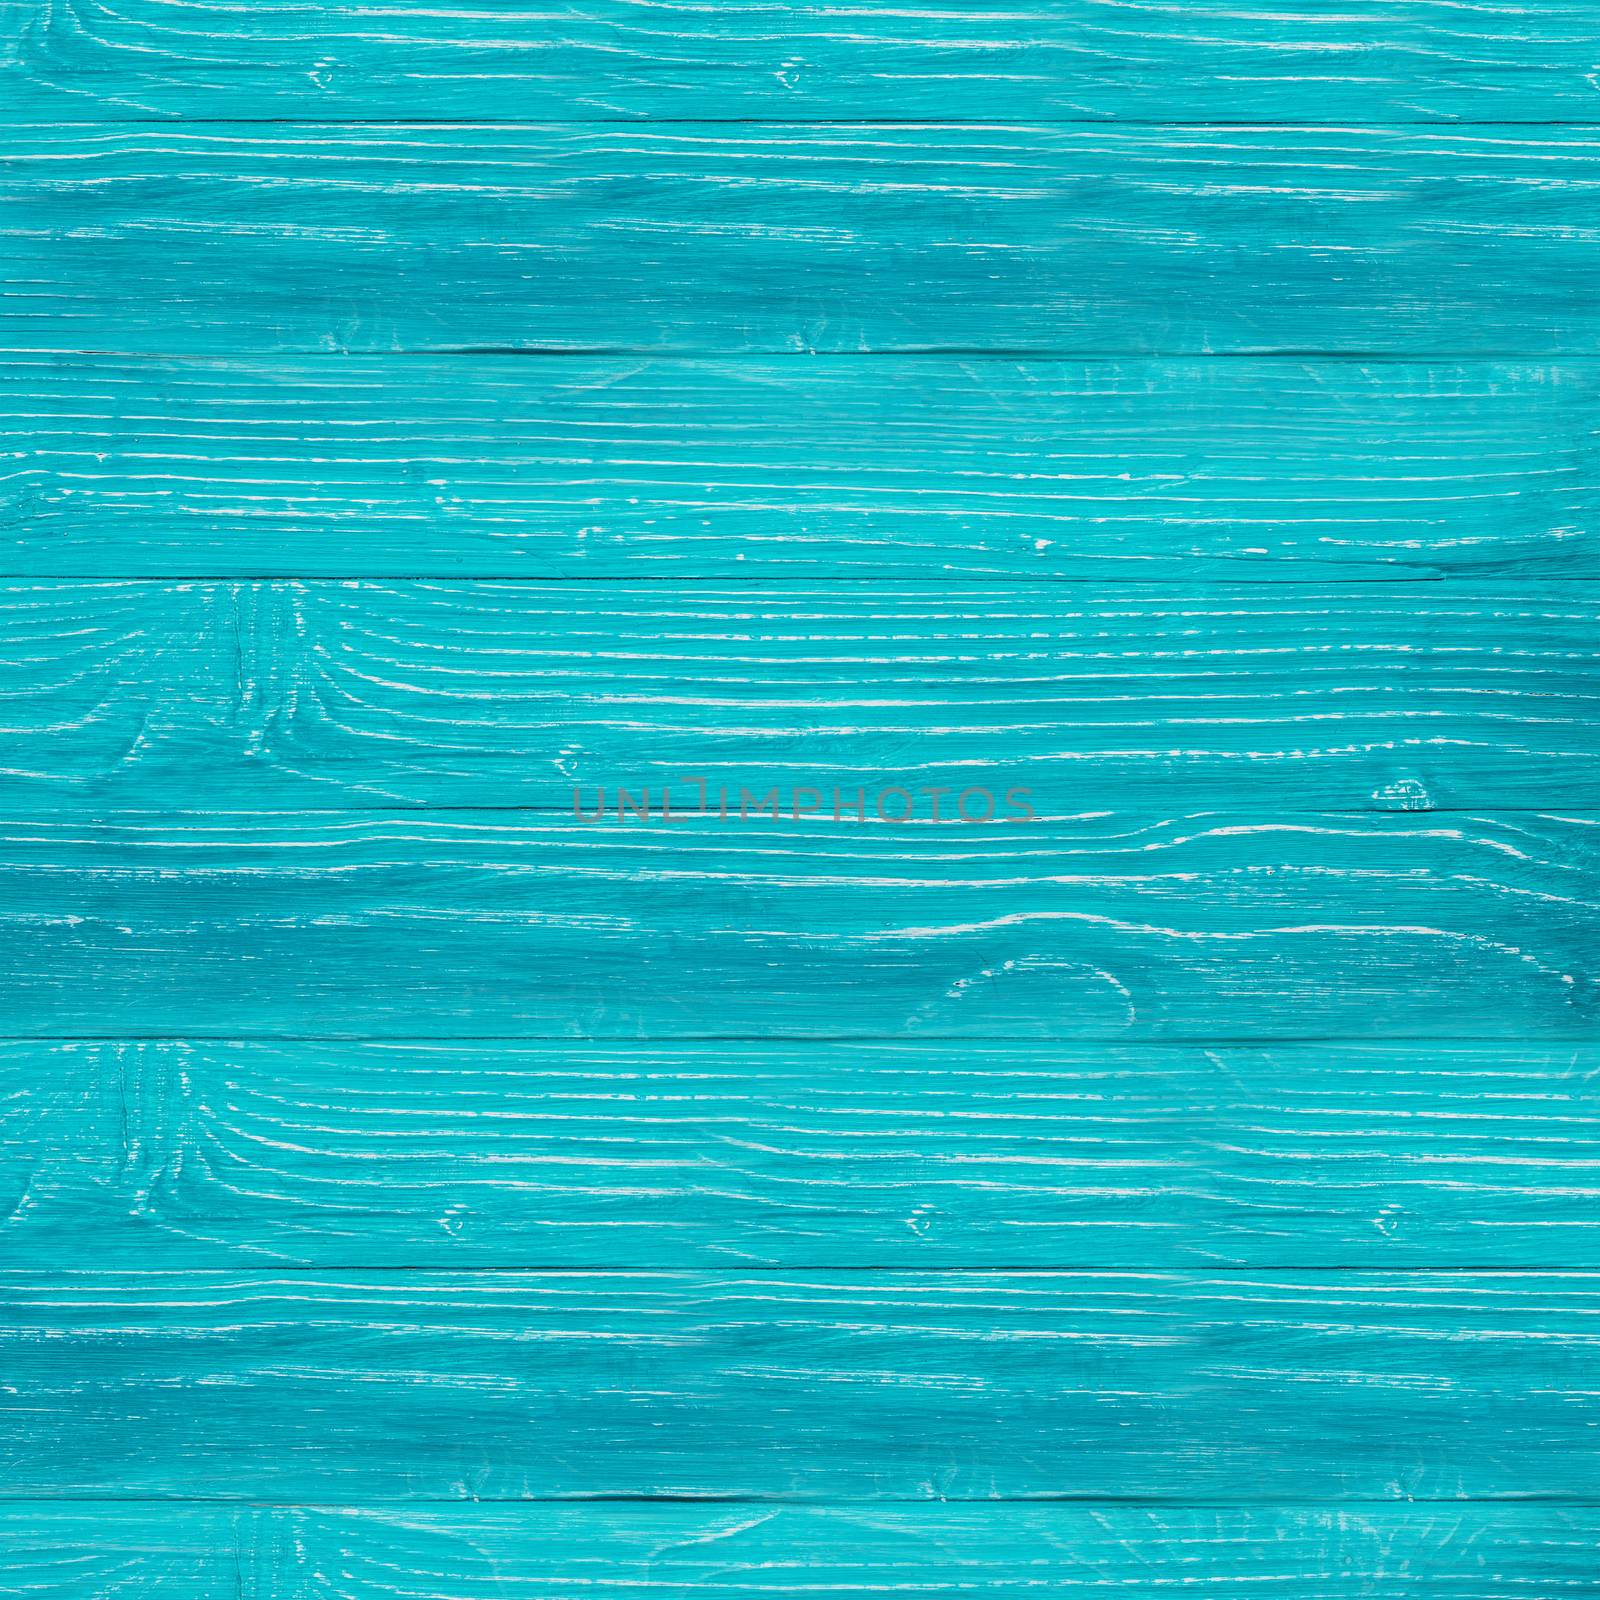 The fence is painted in turquoise color background or texture